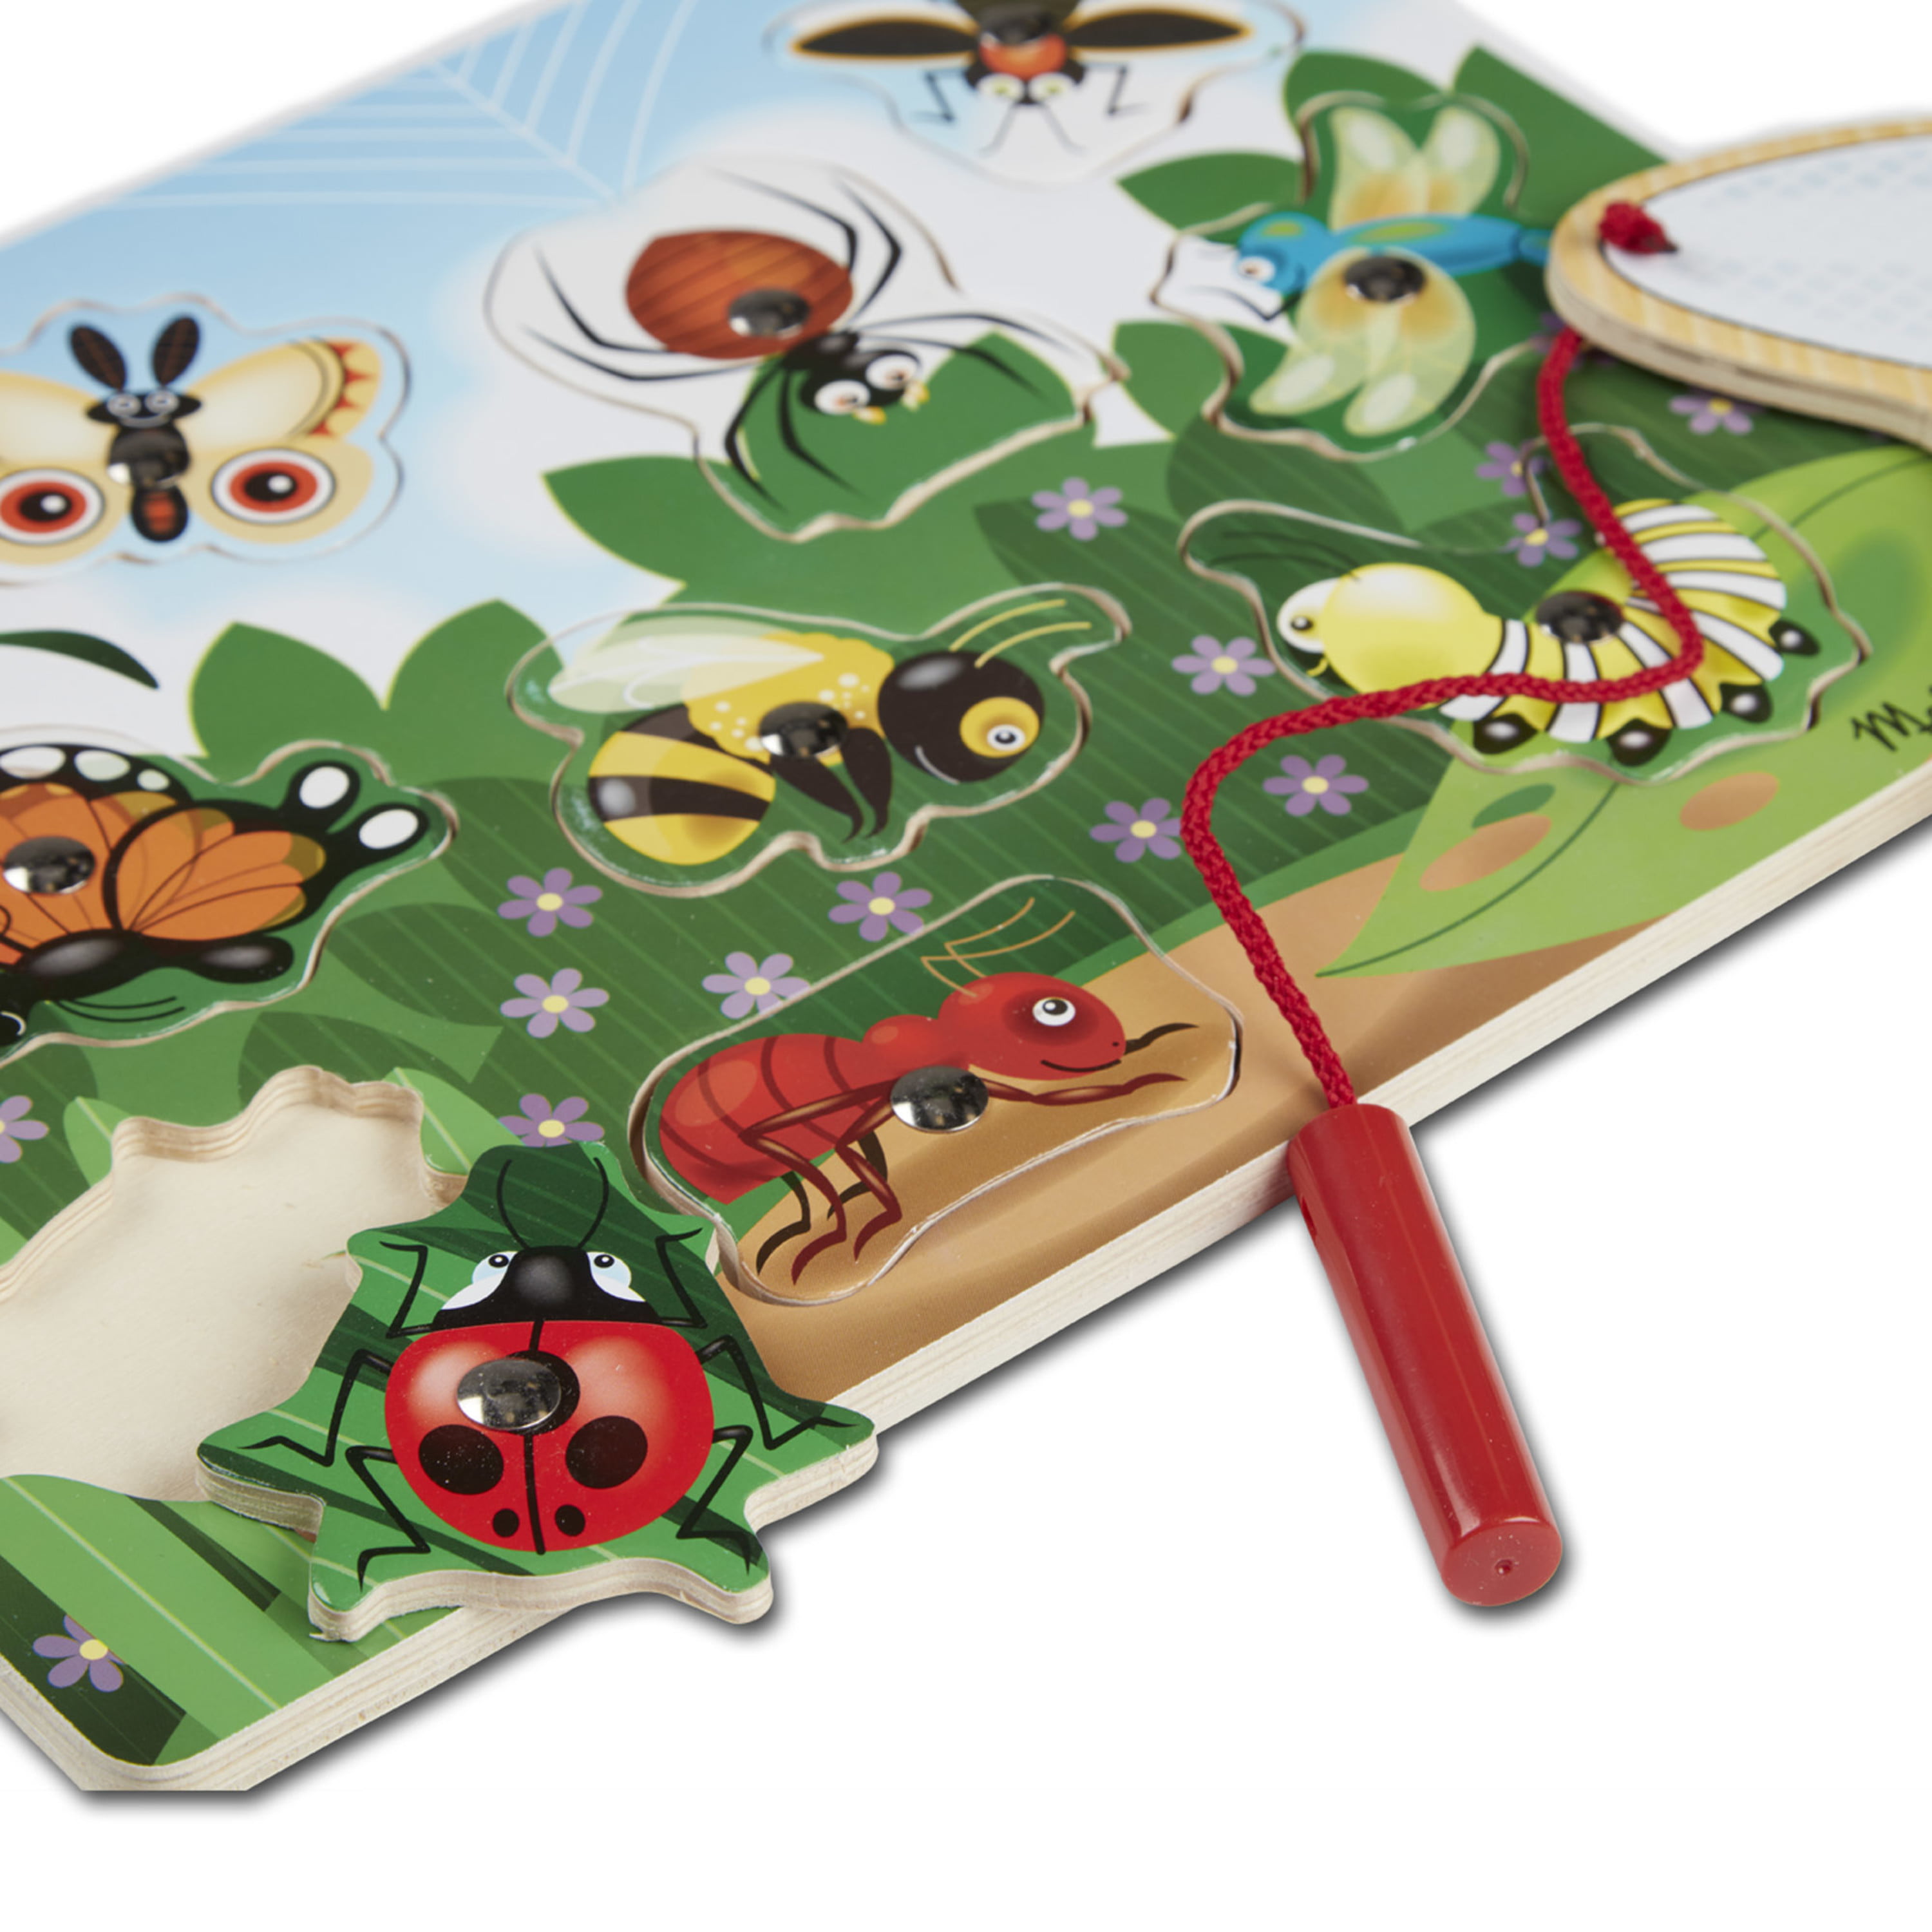 Details about   Melissa & Doug Magnetic Bug-Catching Wooden Game 13779 